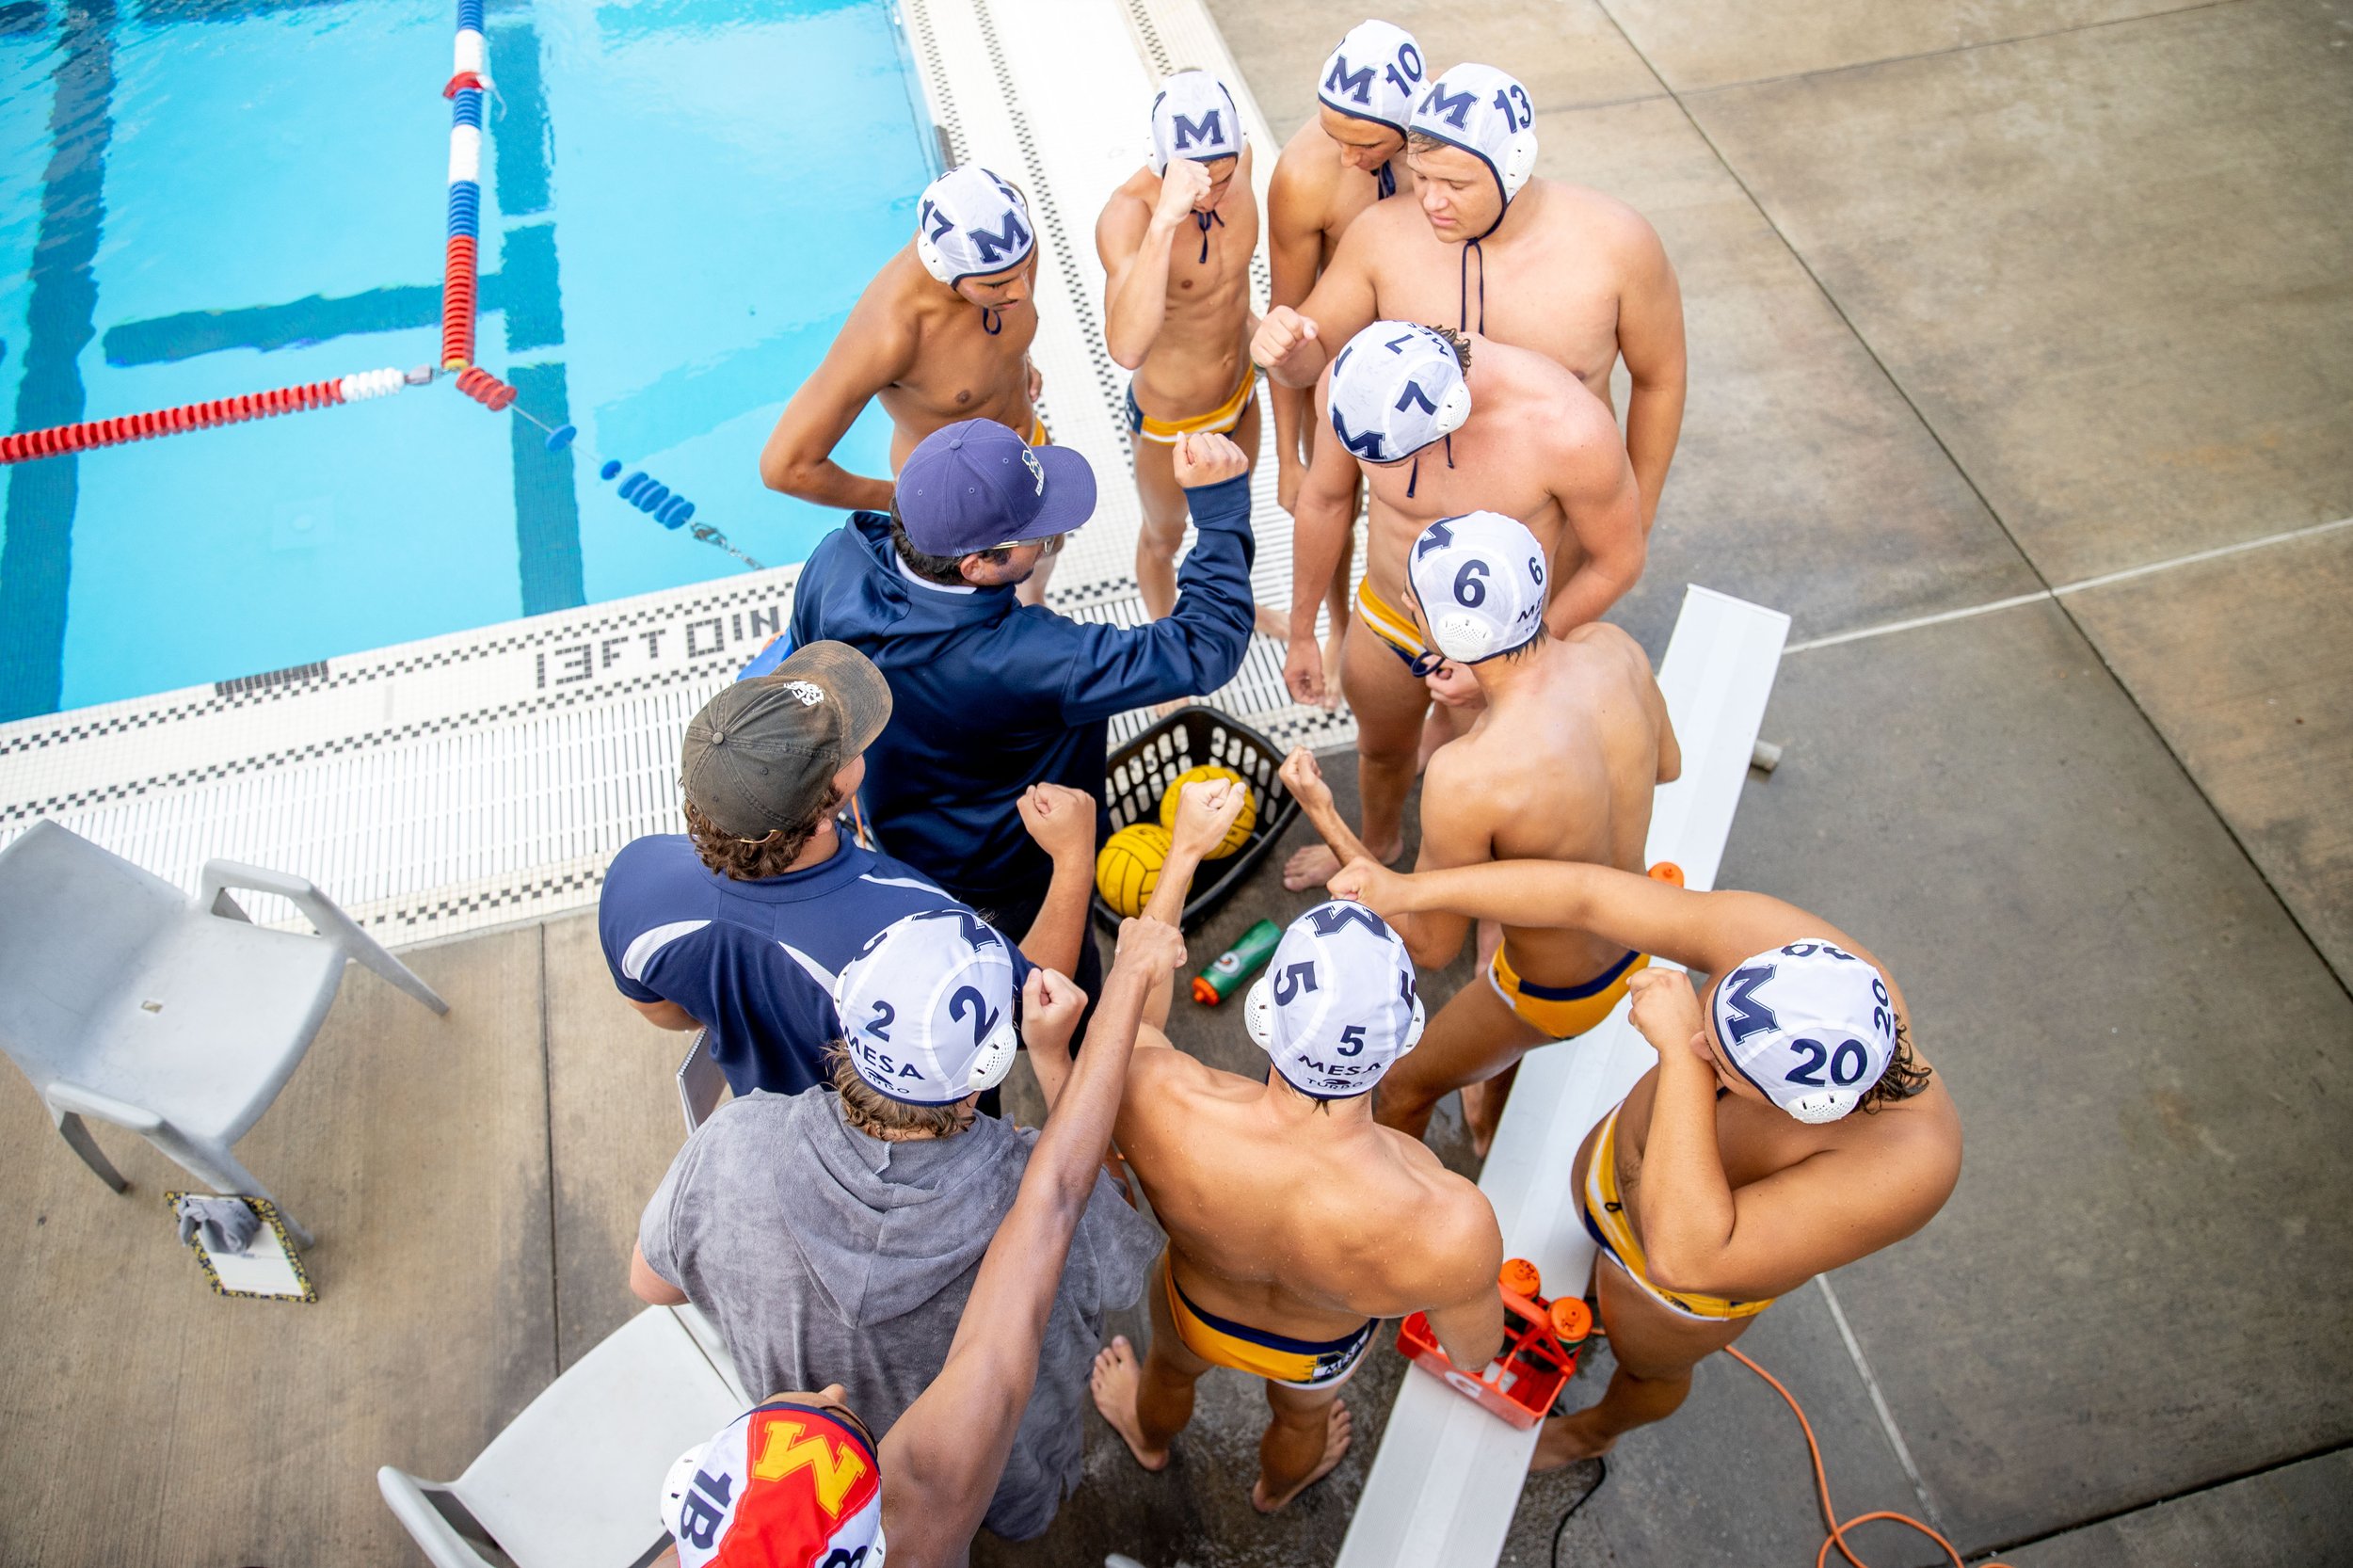  San Diego Mesa players confer during a waterpolo game at Santa Monica College in Santa Monica, Calif., on Friday, Oct. 21, 2022. (Ethan Swope | The Corsair)   